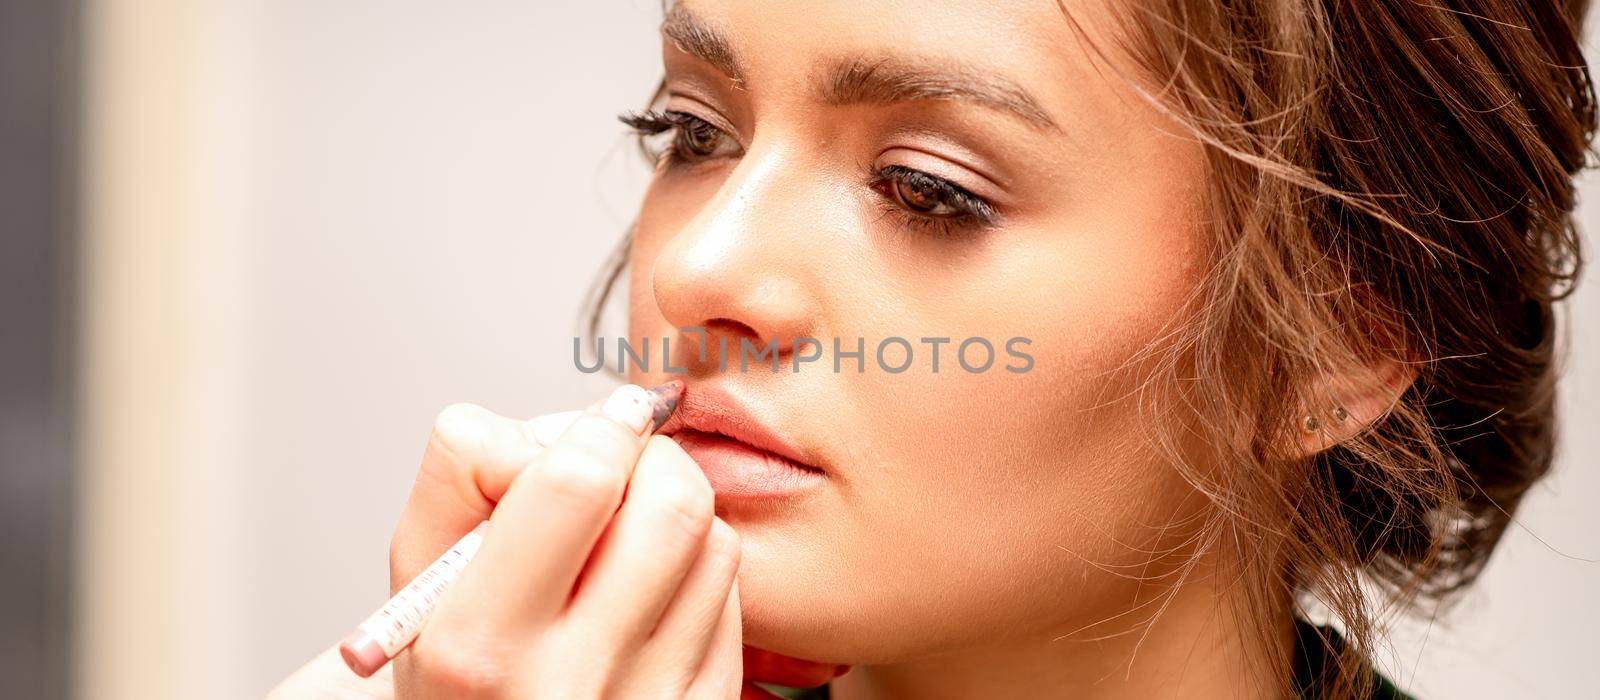 Lips makeup. Makeup artist applies contour with a pencil to the lips of a young woman in a beauty salon